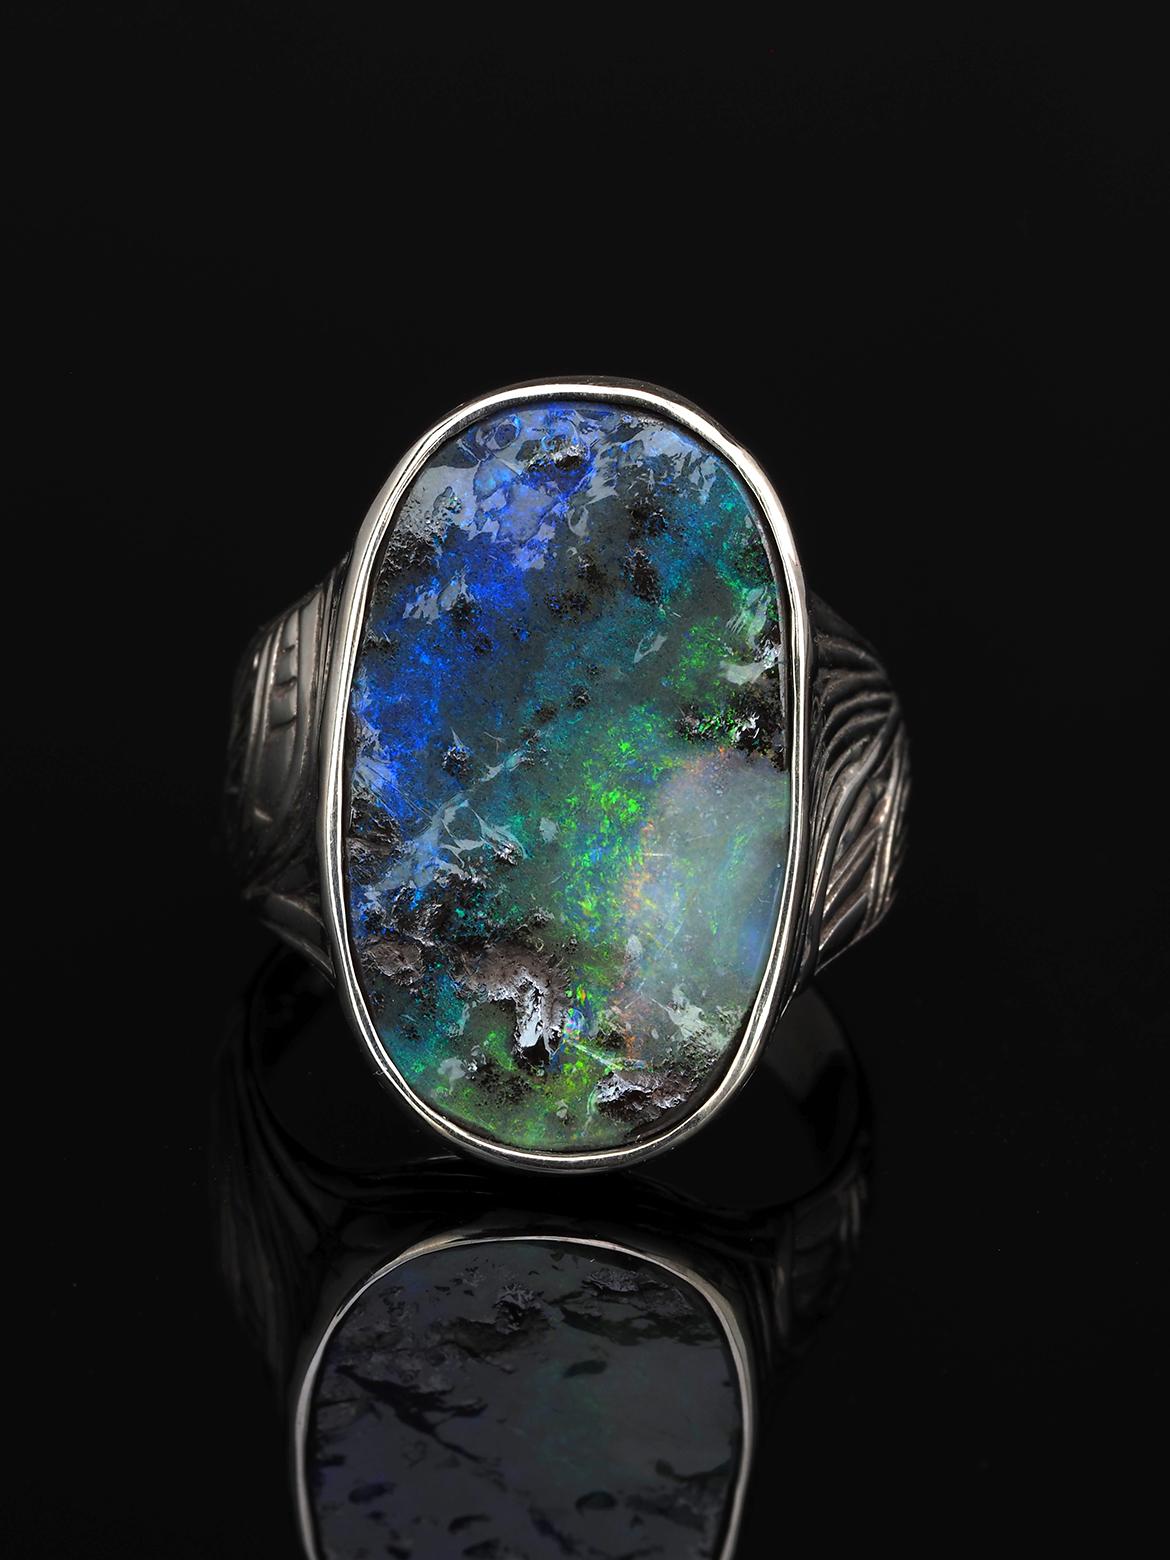 Big silver ring with natural Boulder Opal
opal origin - Australia 
opal measurements - 0.12 x 0.55 x 0.94 in / 3 х 14 х 24 mm
stone weight - 9.85 carats
ring size - 9 US
ring weight - 9.14 grams


We ship our jewelry worldwide – for our customers it